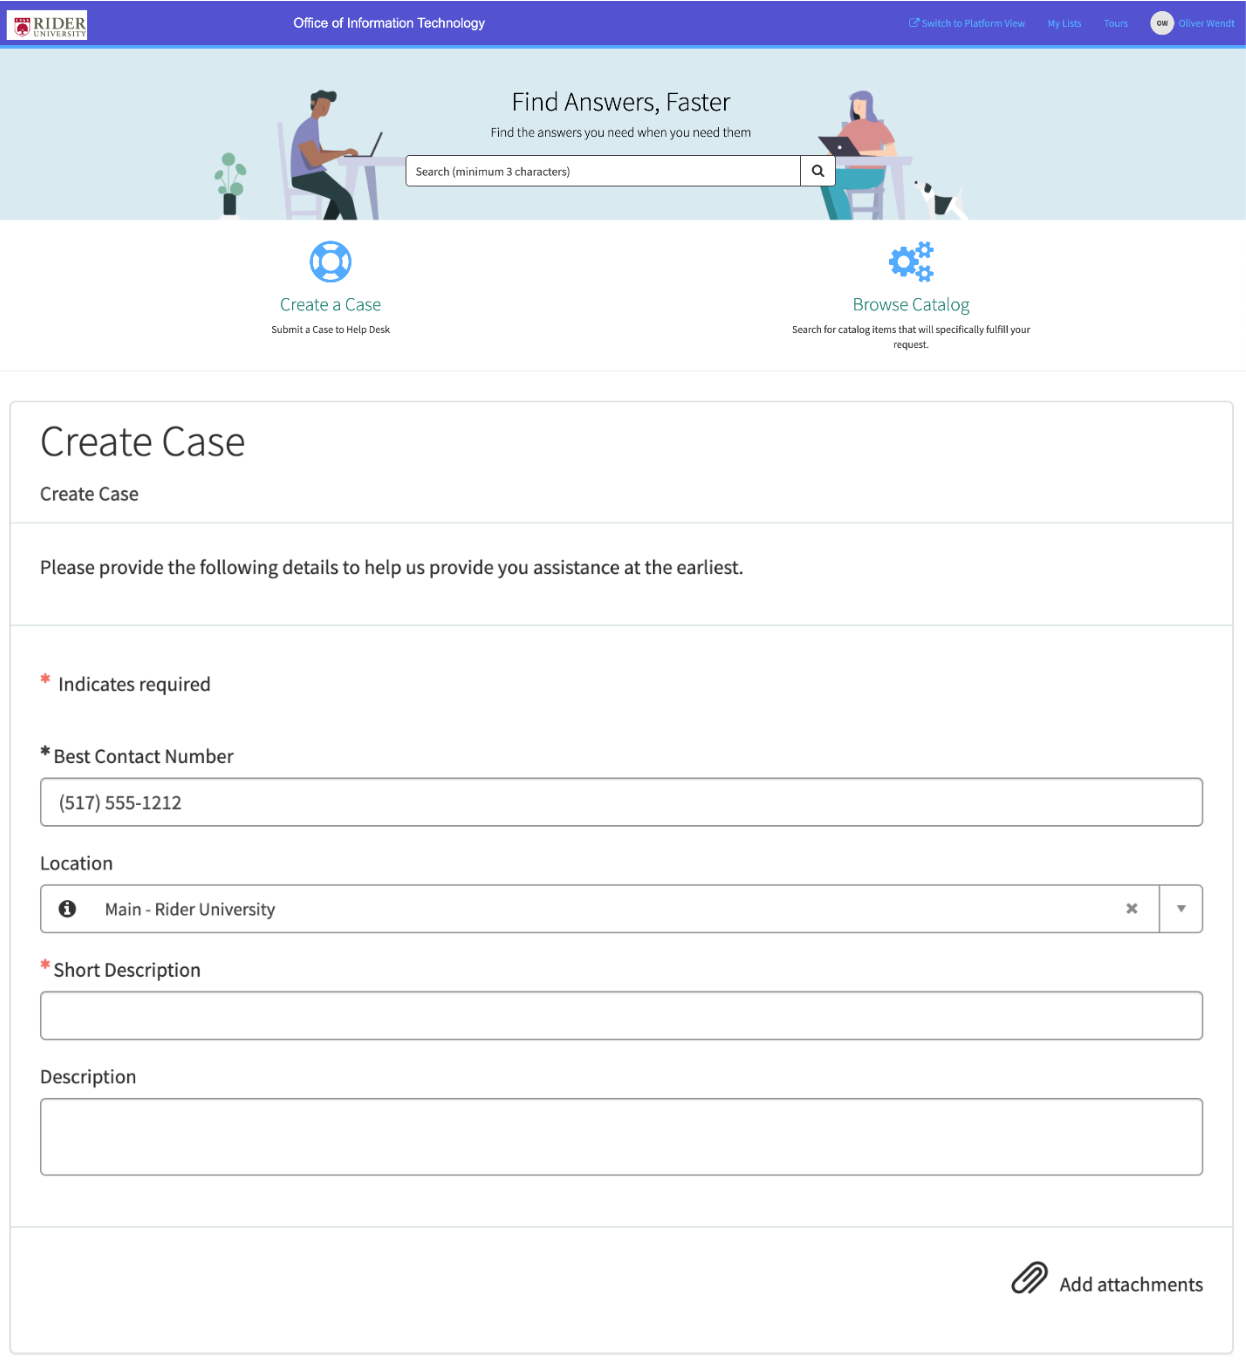 Create a new case in the Help Desk system